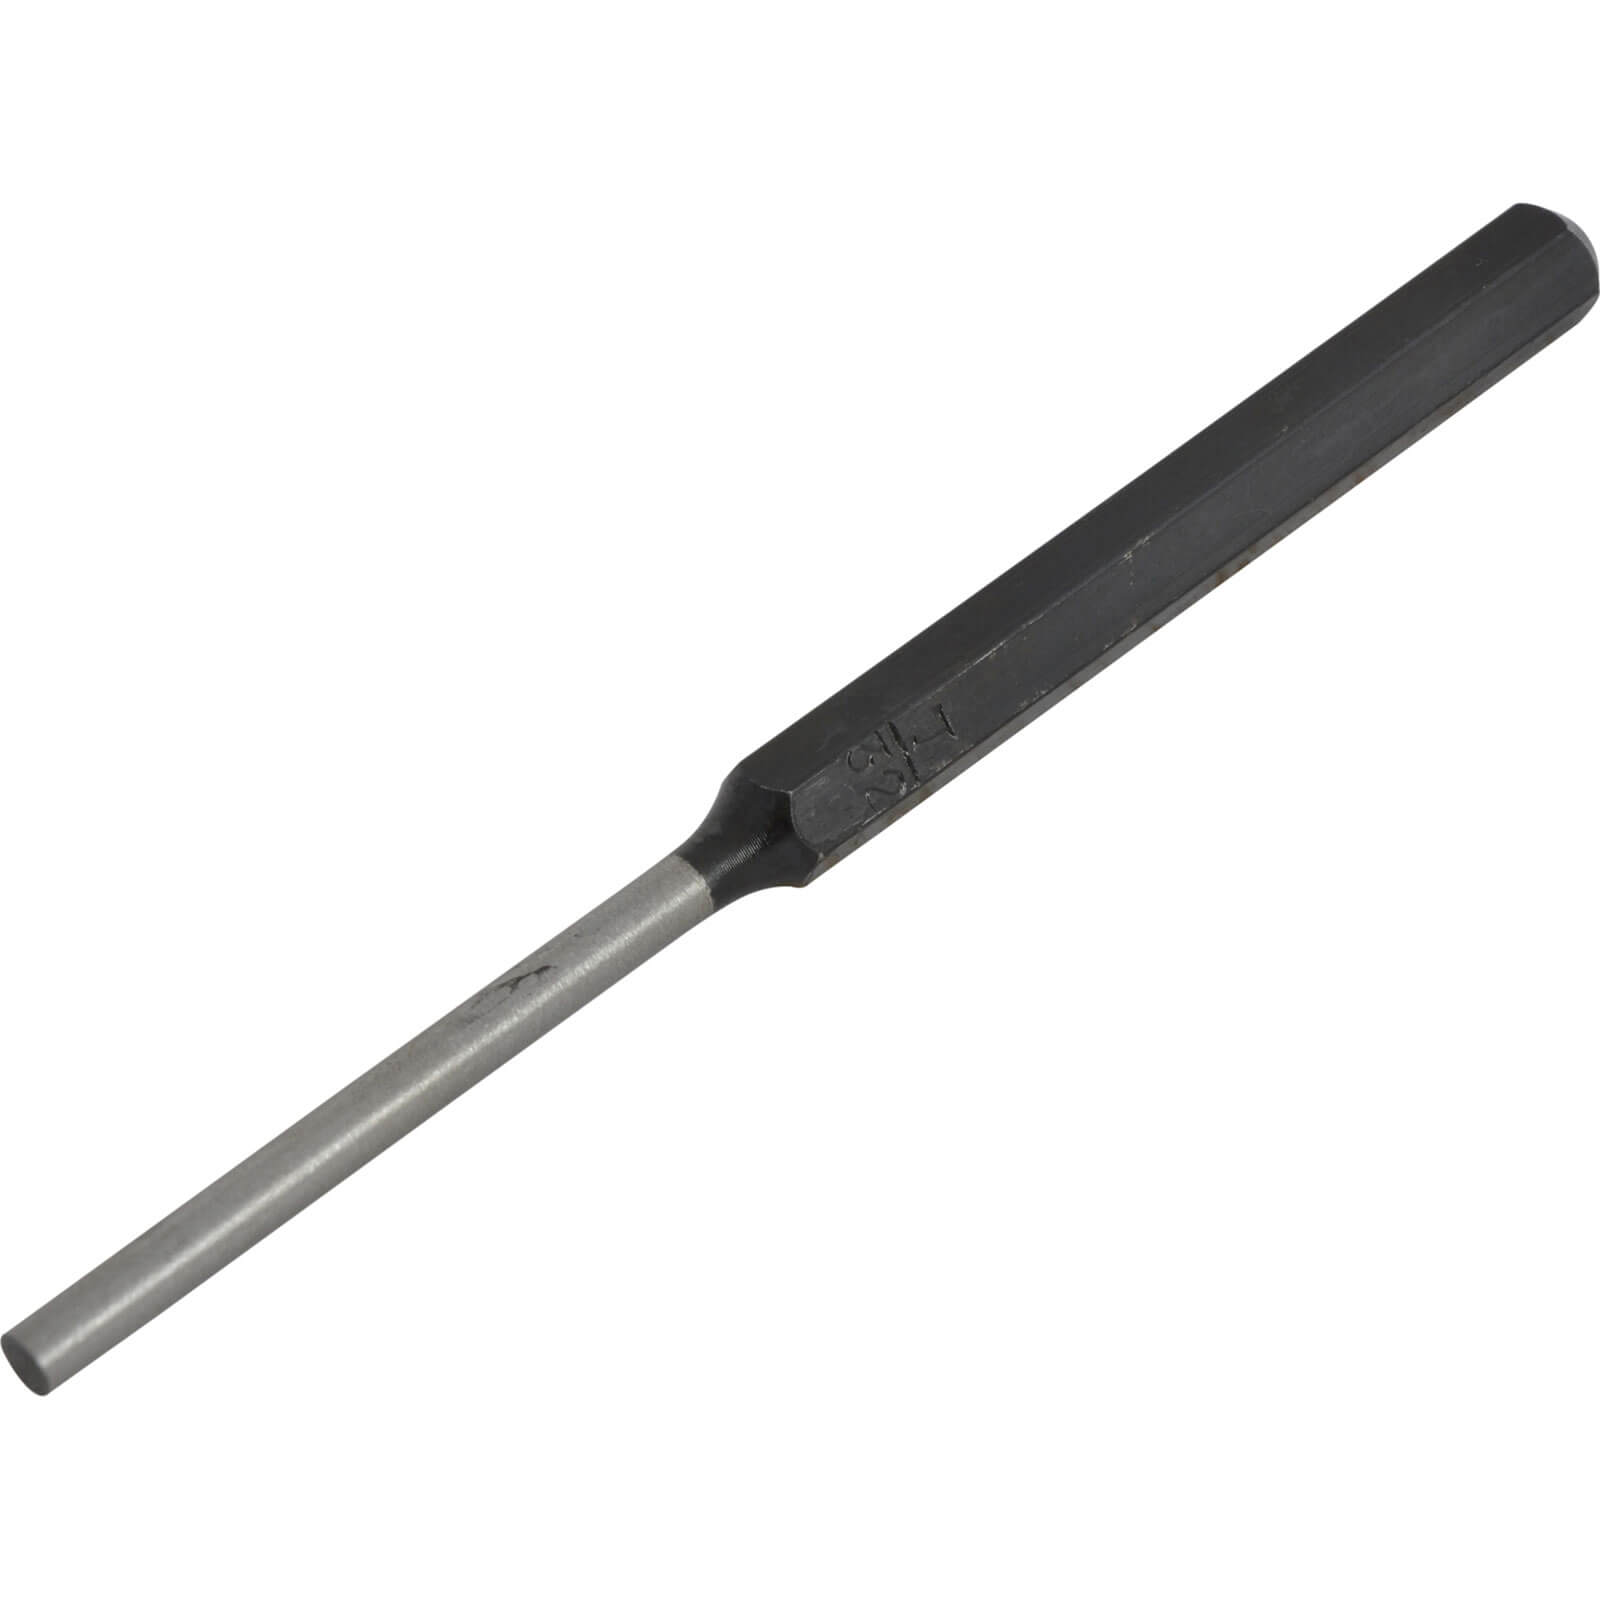 Image of Priory Long Parallel Pin Punch 7/32"